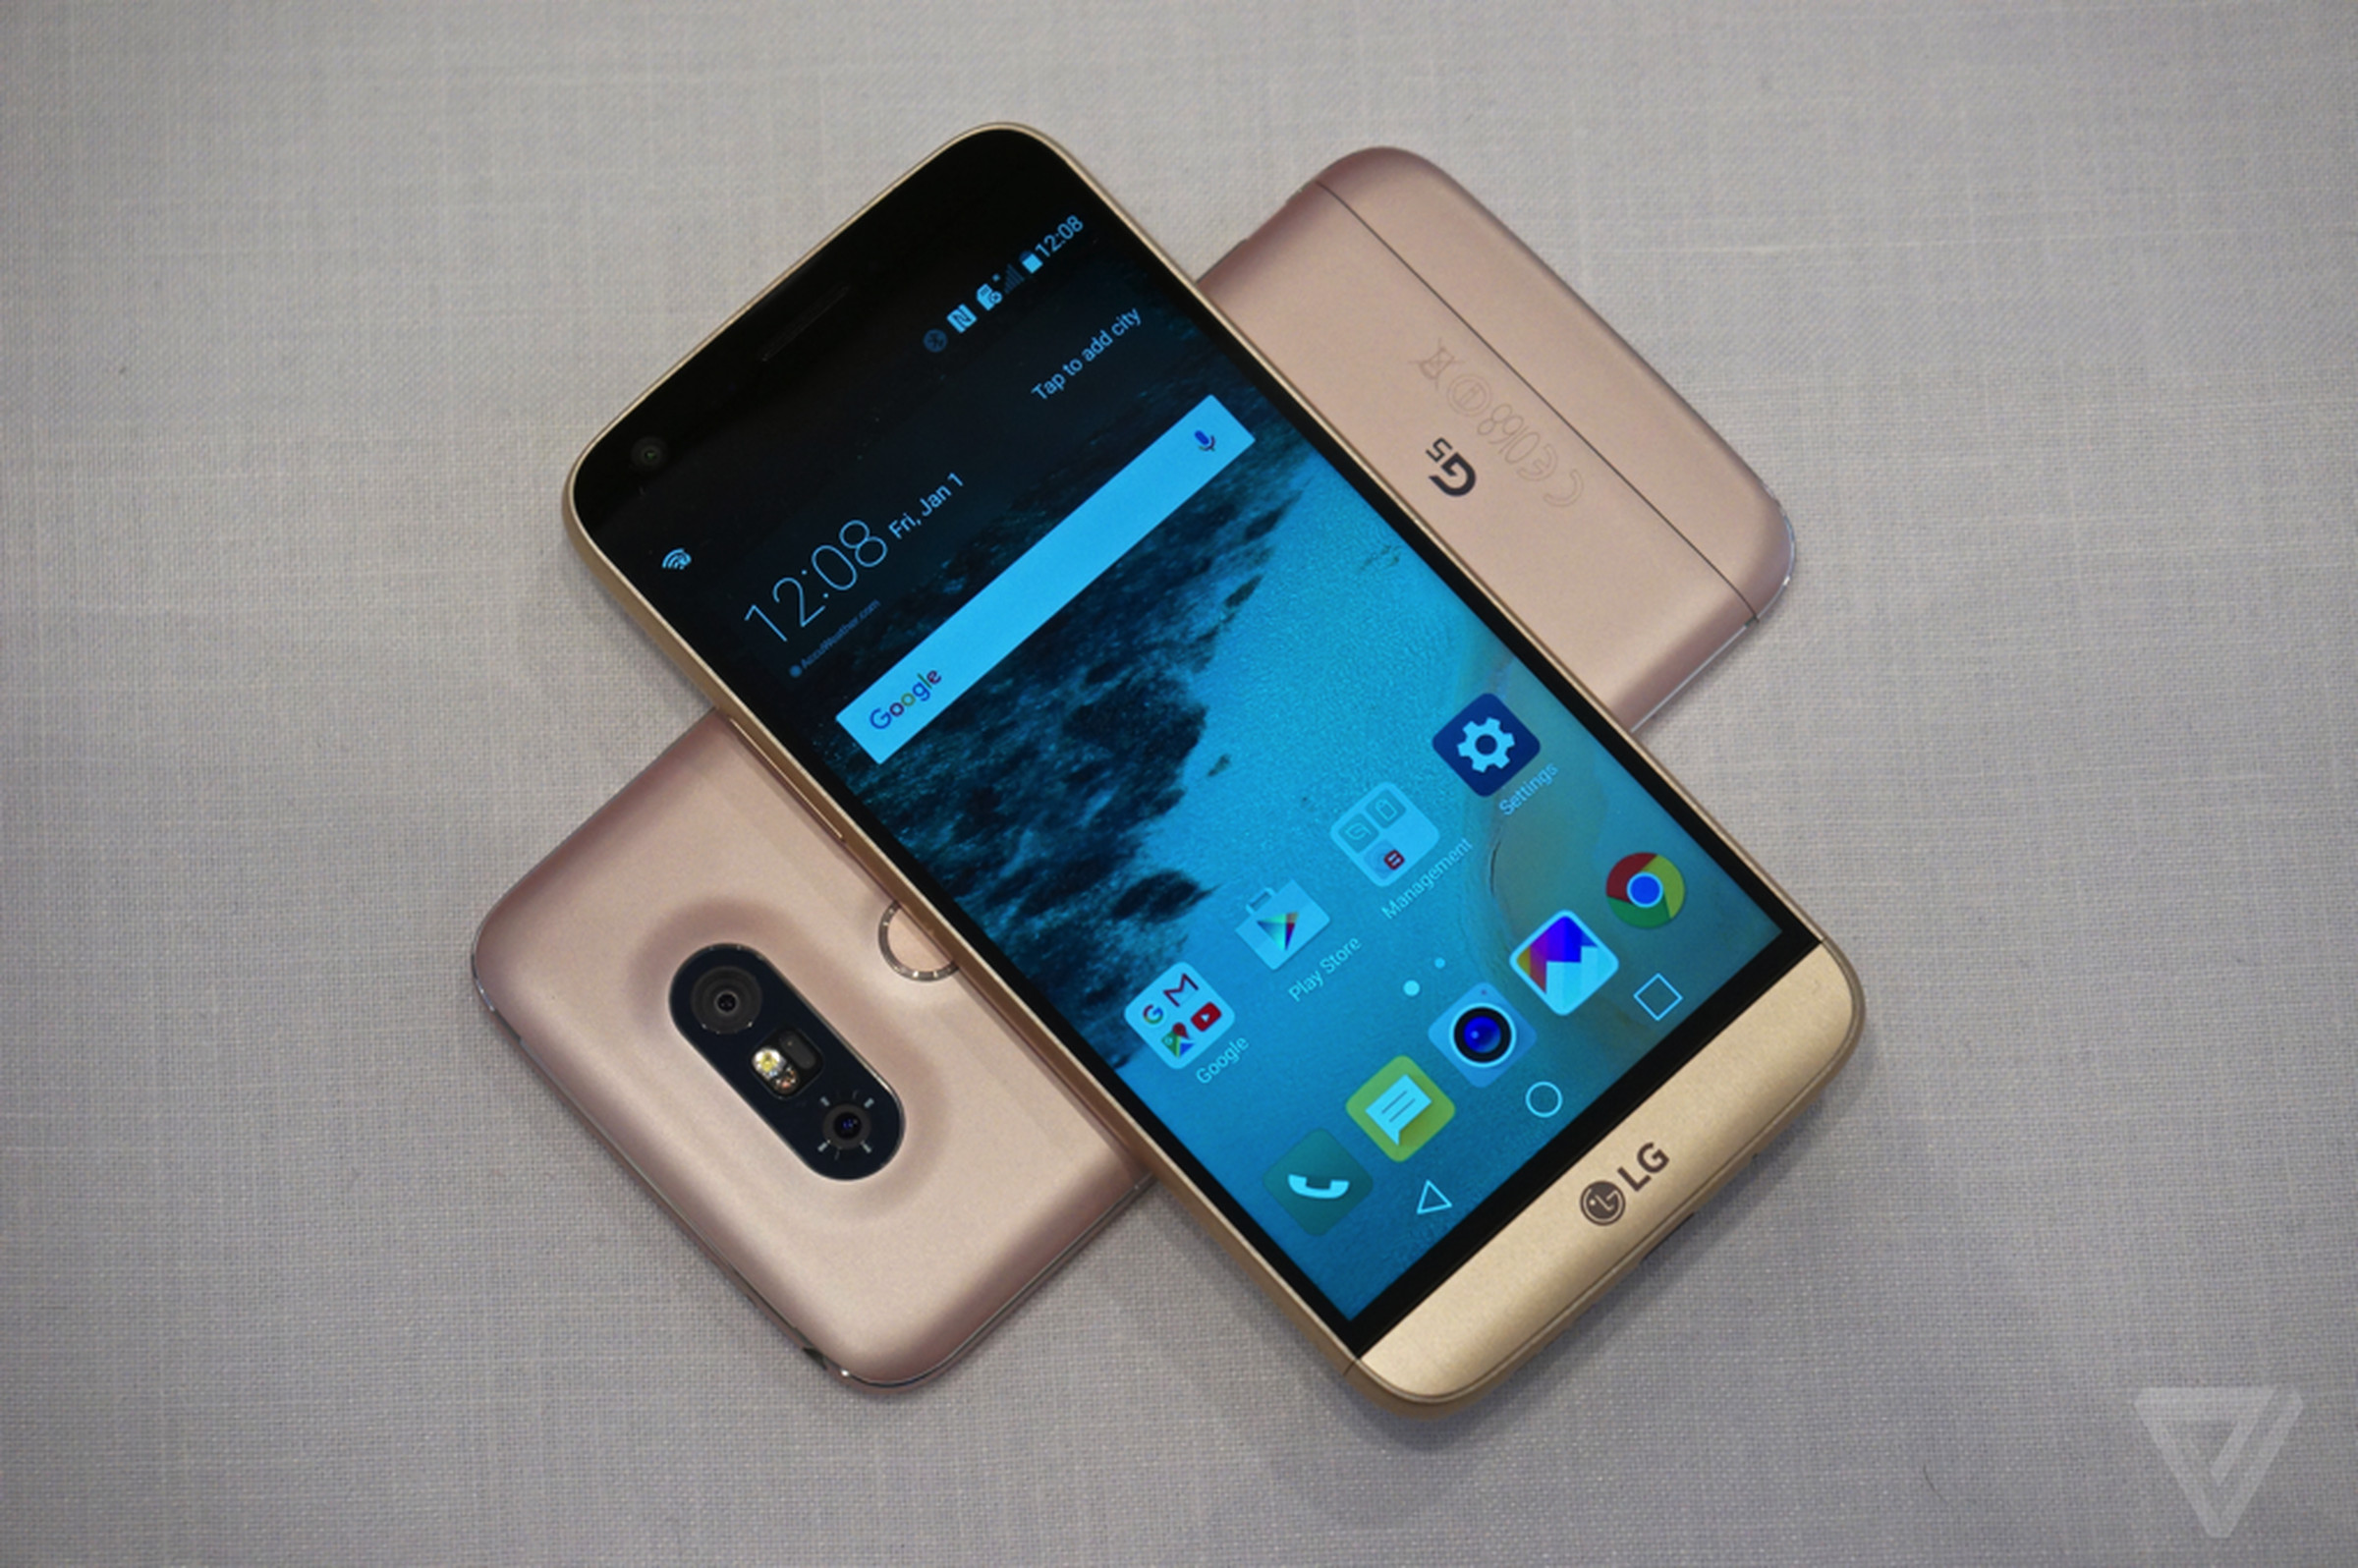 LG G5 and Friends hands-on photos